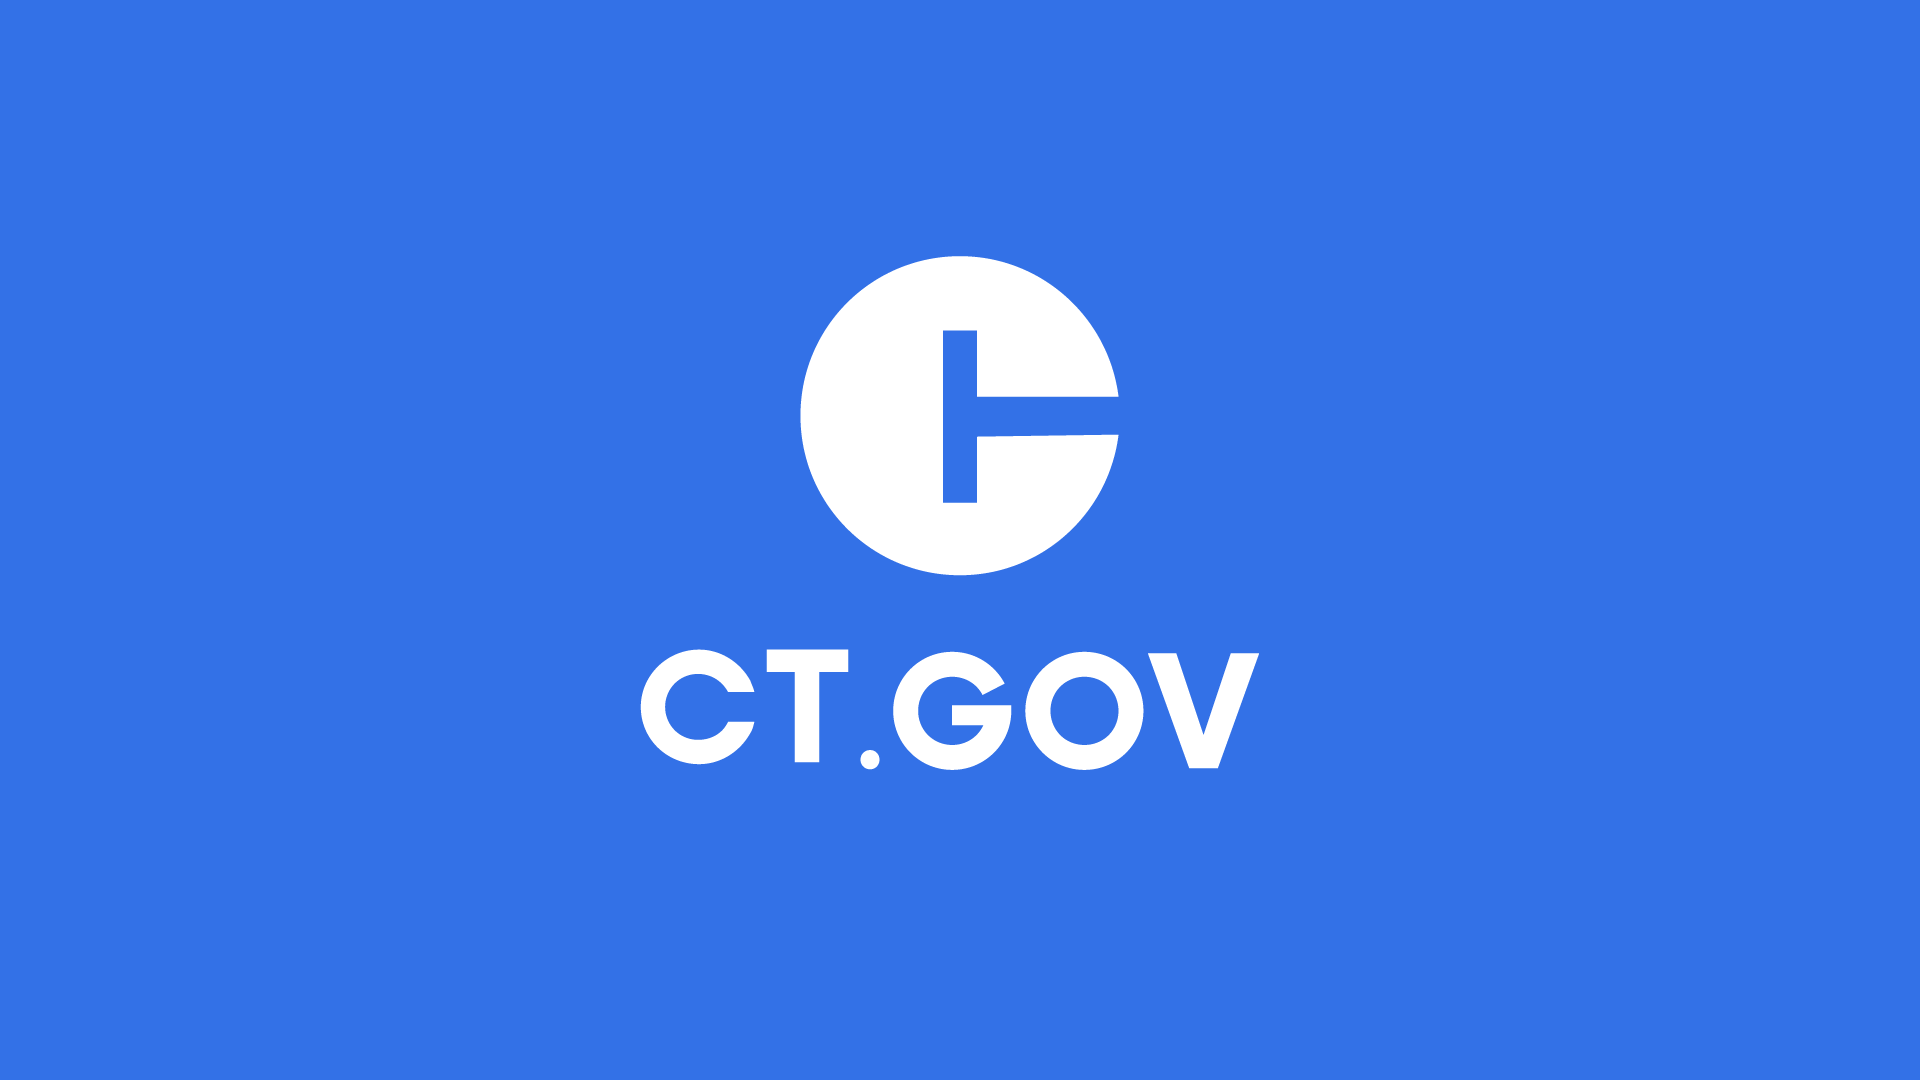 Governor Lamont Announces Federal Approval of Connecticut’s Plan To Support Entrepreneurs and Small Businesses Growth With COVID Recovery Funding